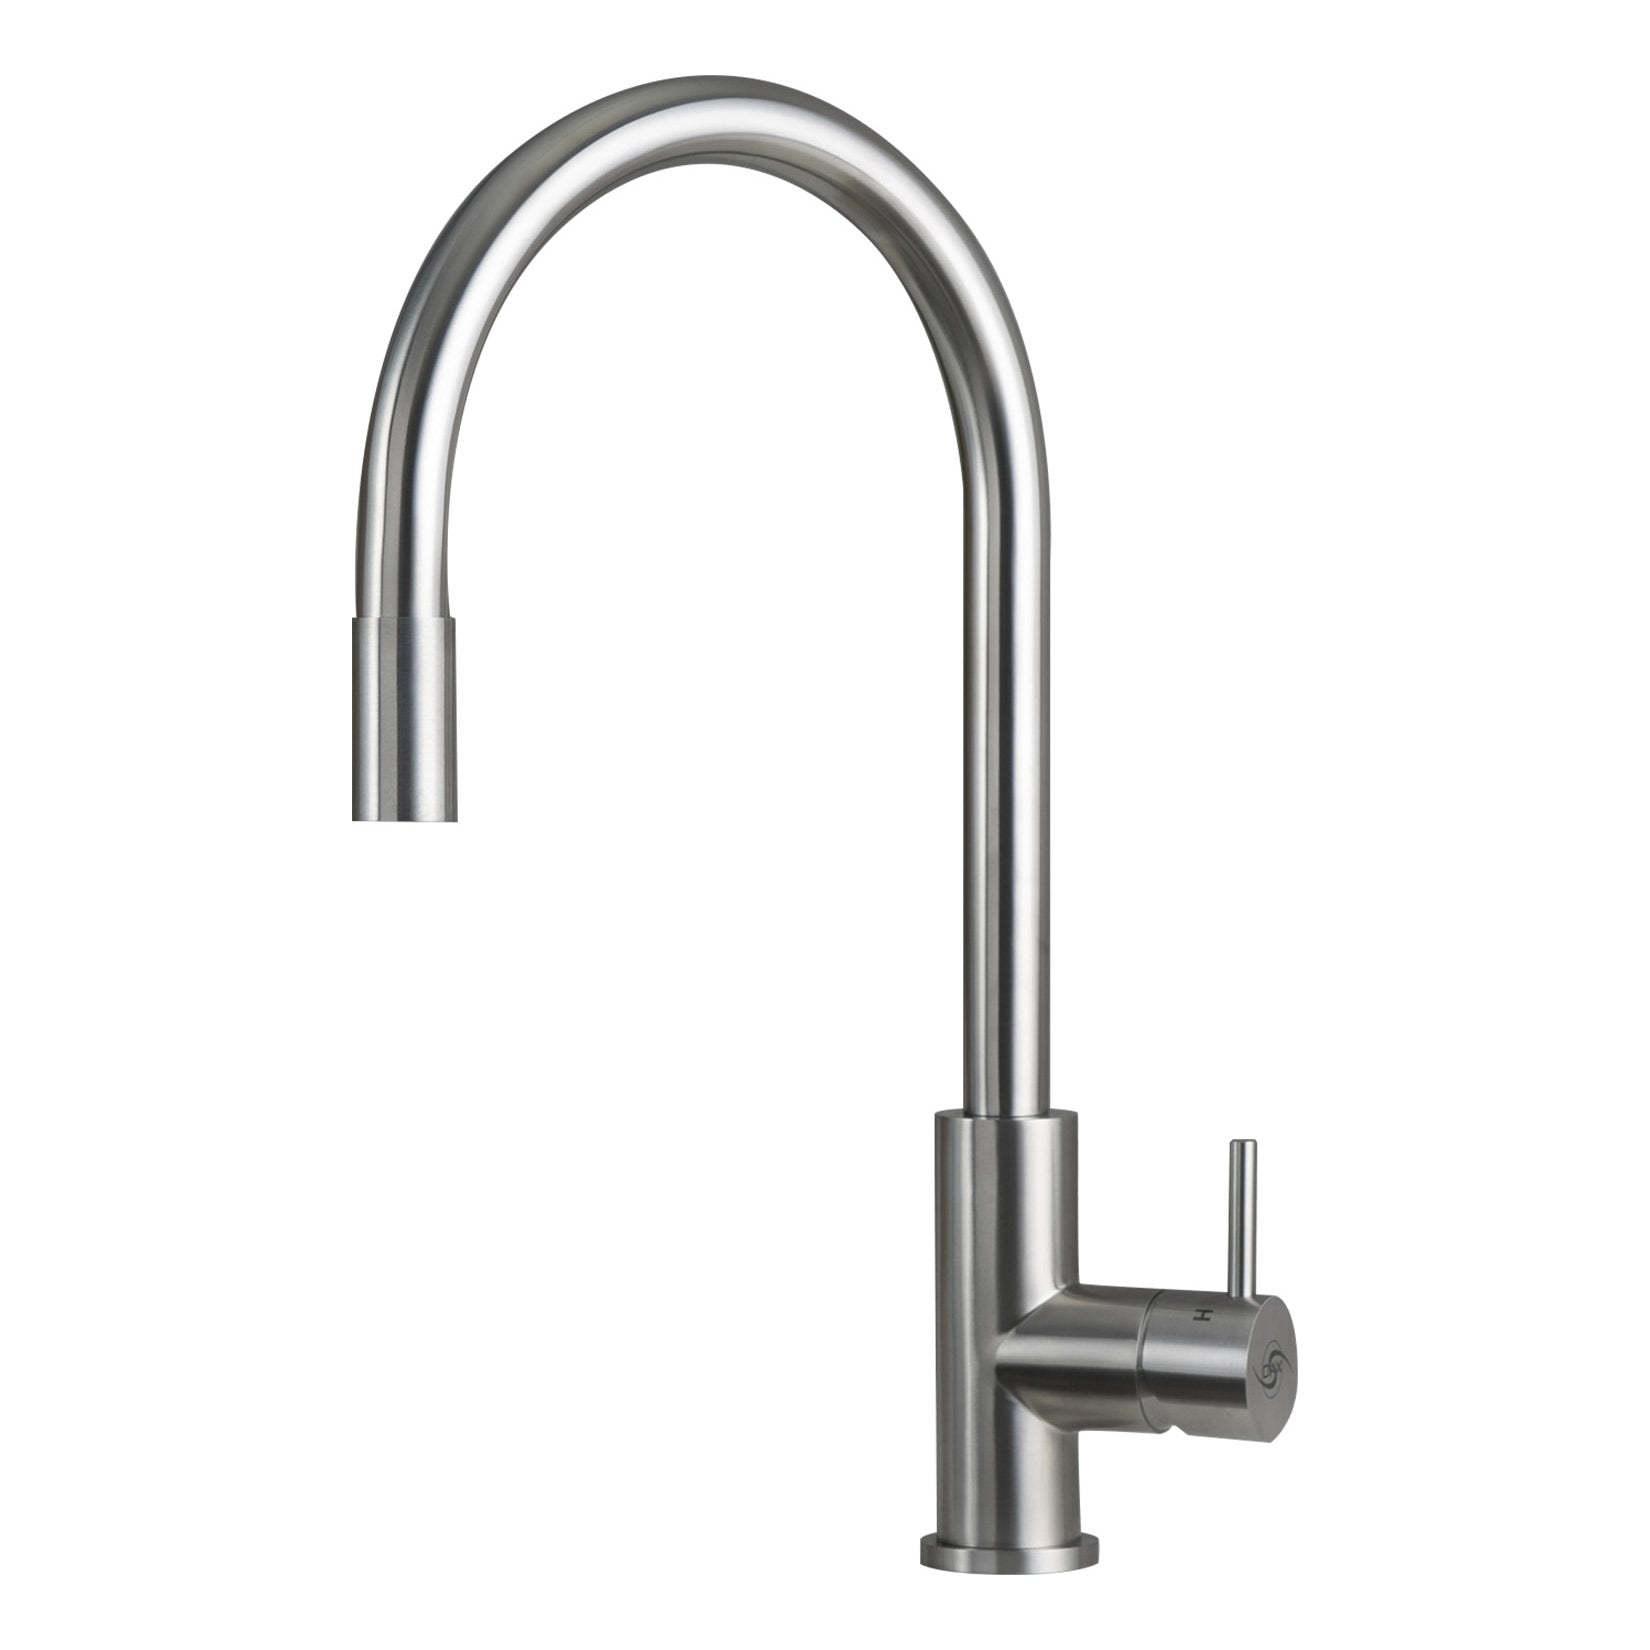 DAX Single Handle Pull Down Kitchen Faucet, Stainless Steel Shower Head and Body, Brushed Finish, Size 8-11/16 x 16-9/16 Inches (DAX-003-02-BN)